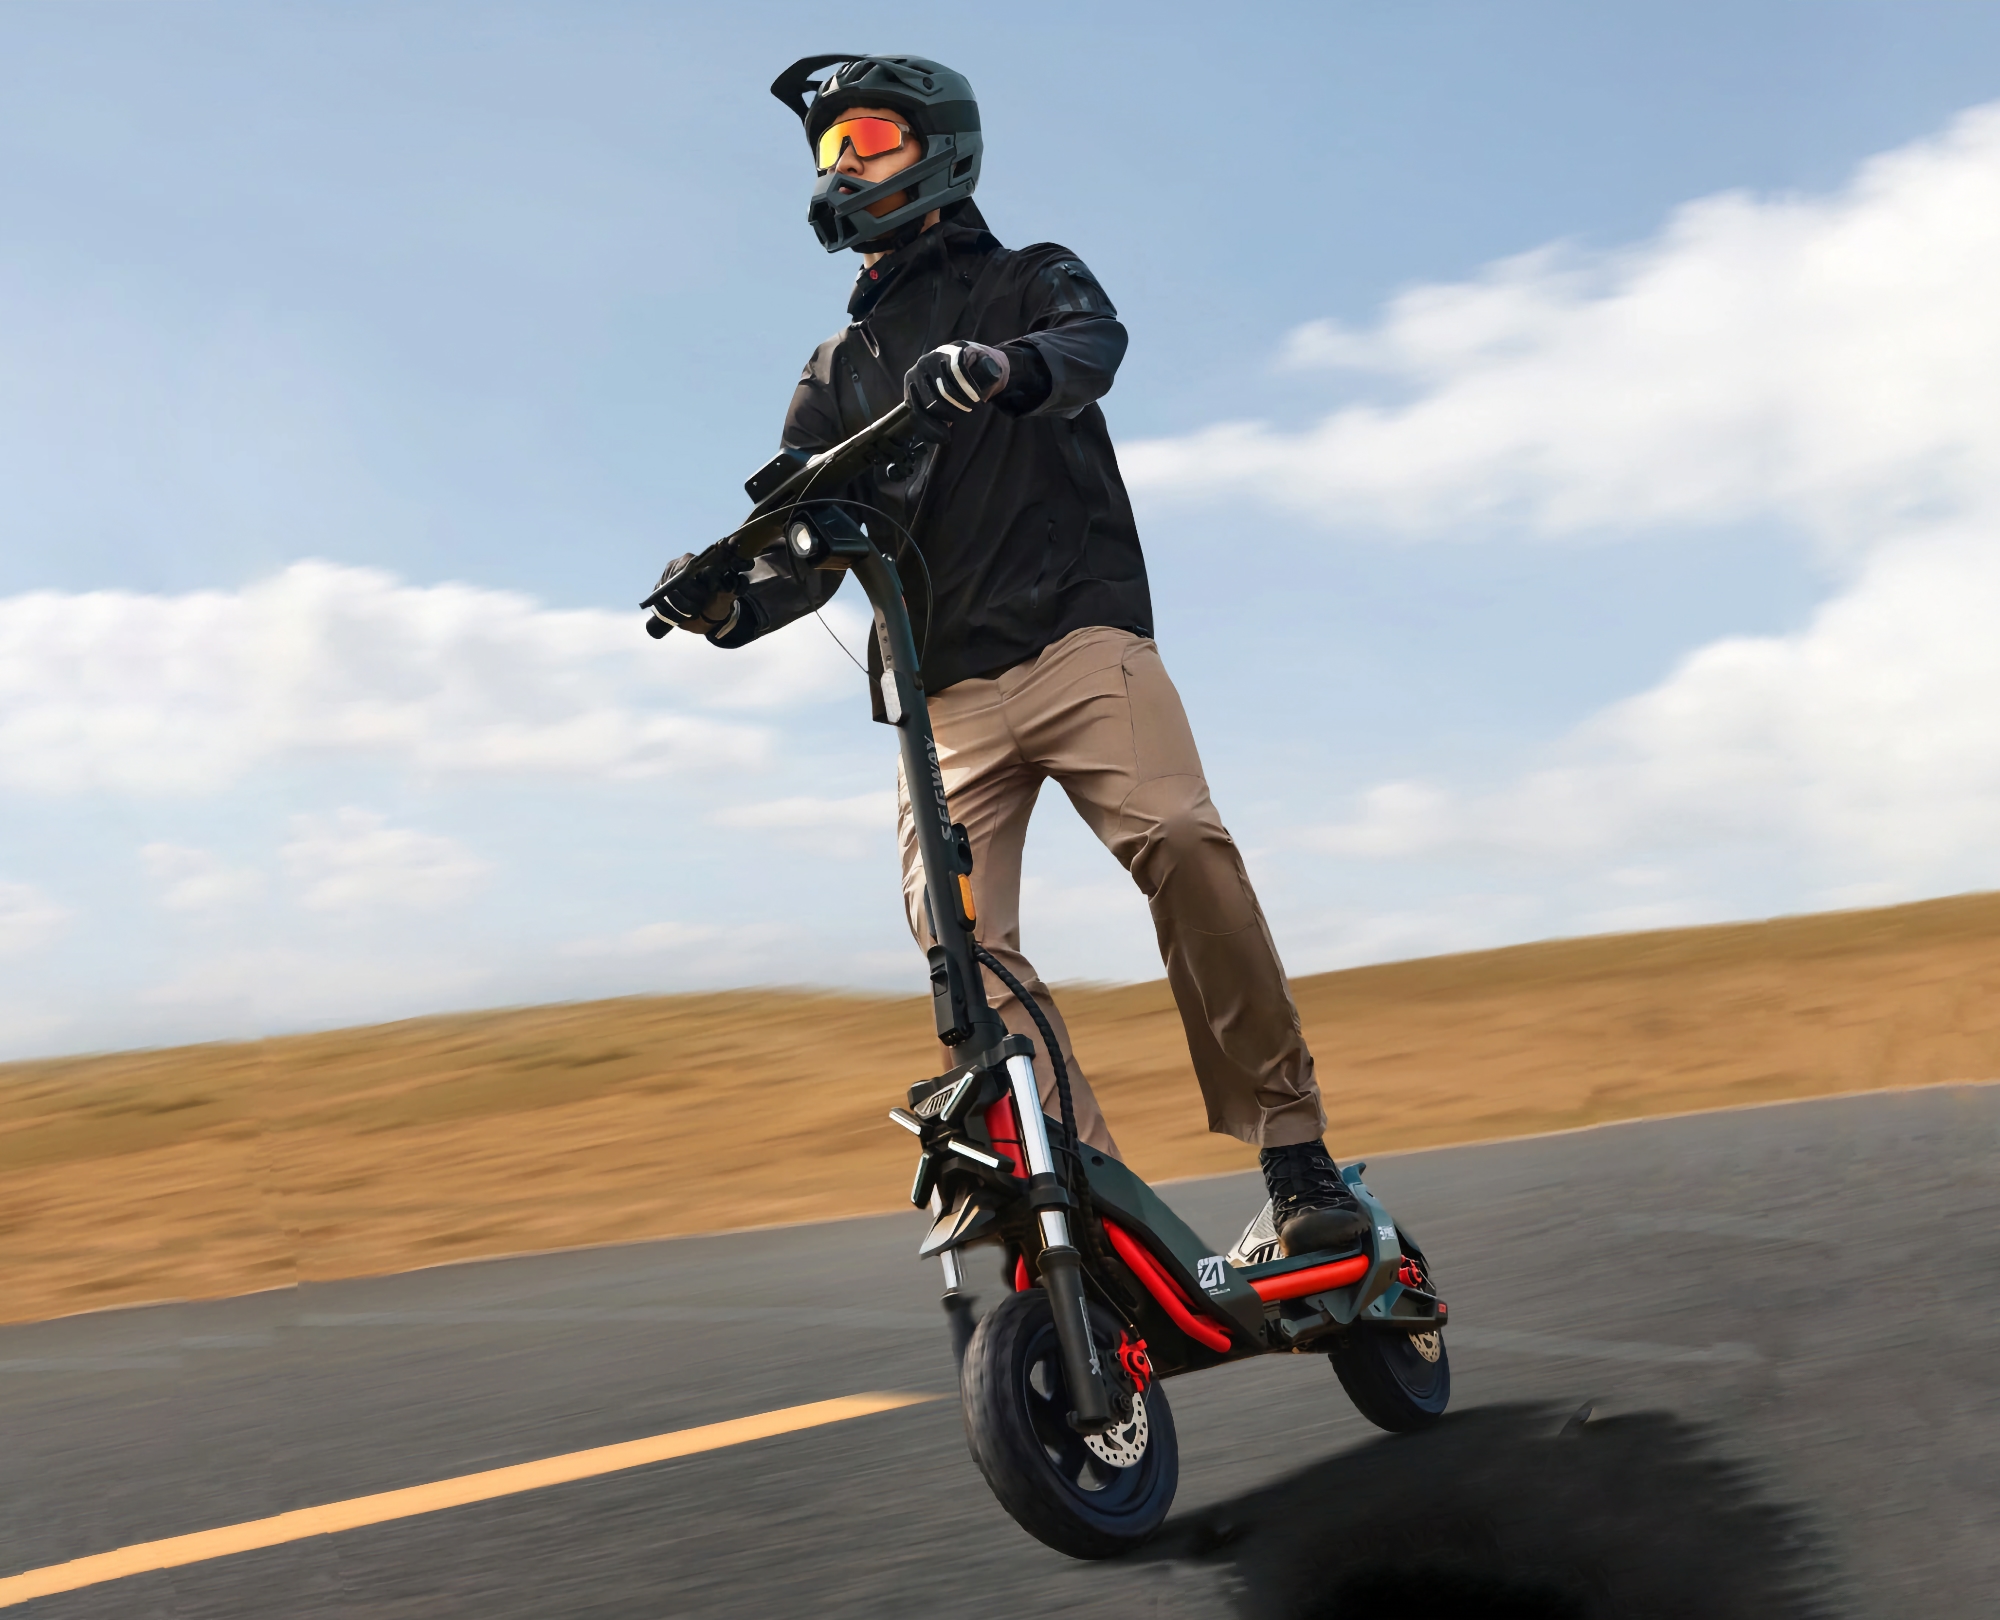 Segway ZT3 Pro: an electric scooter with a range of up to 40km and a top speed of 32km/h for $467